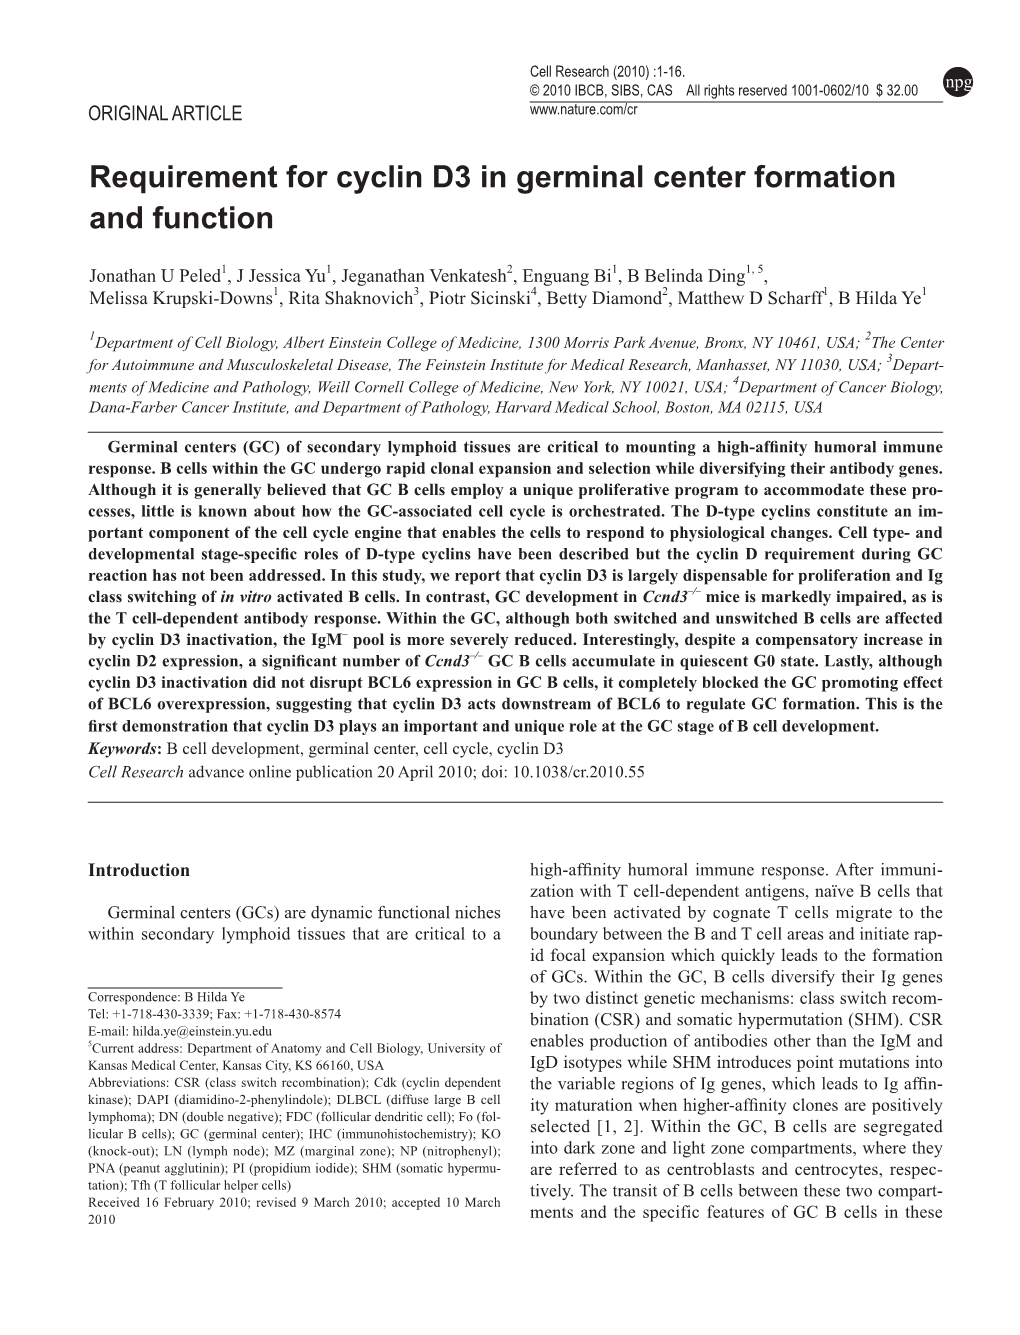 Requirement for Cyclin D3 in Germinal Center Formation and Function